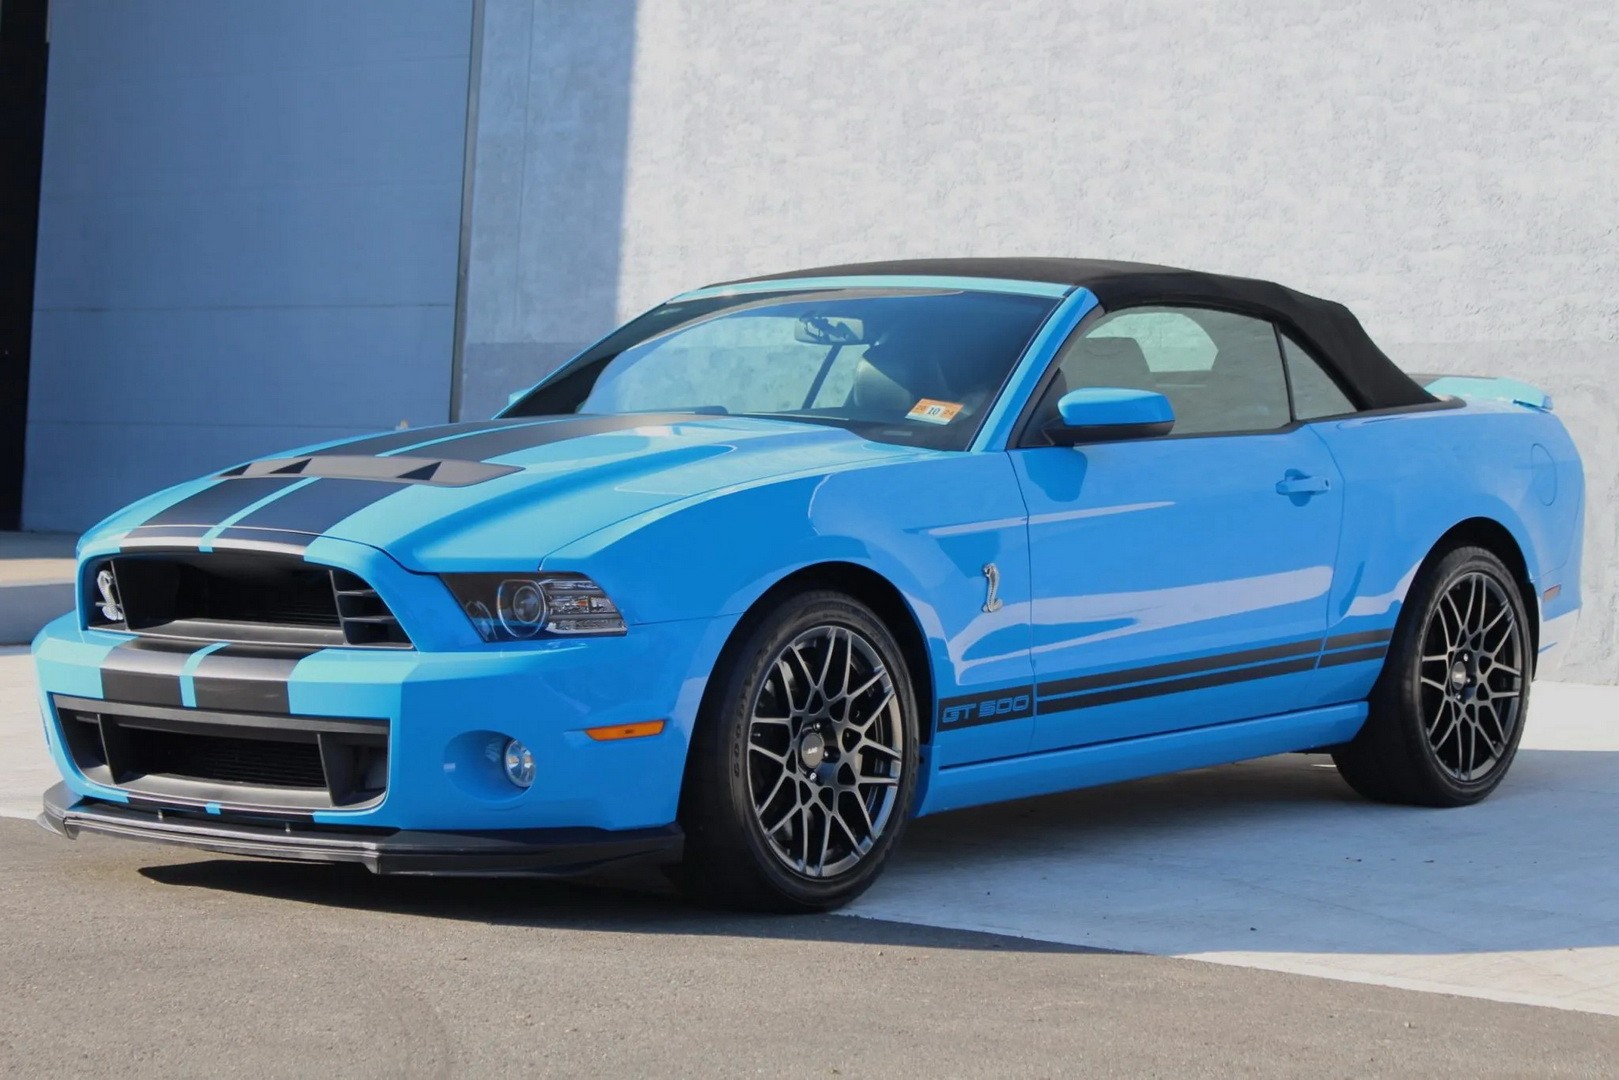 2013 Ford Mustang Shelby GT500 Convertible Packs Awesome Looks, Will ...